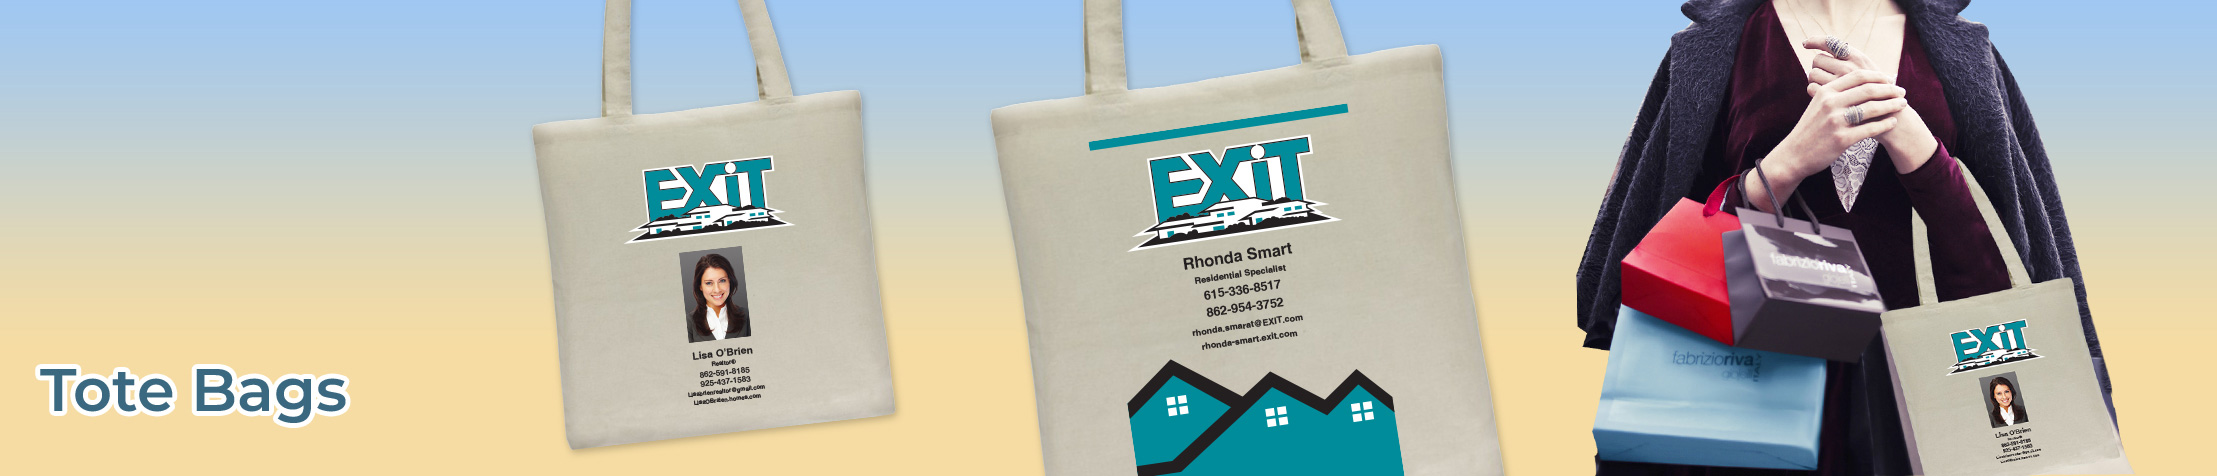 Exit Realty Real Estate Economy Can Cooler - Exit Realty approved vendor personalized realtor promotional products | BestPrintBuy.com